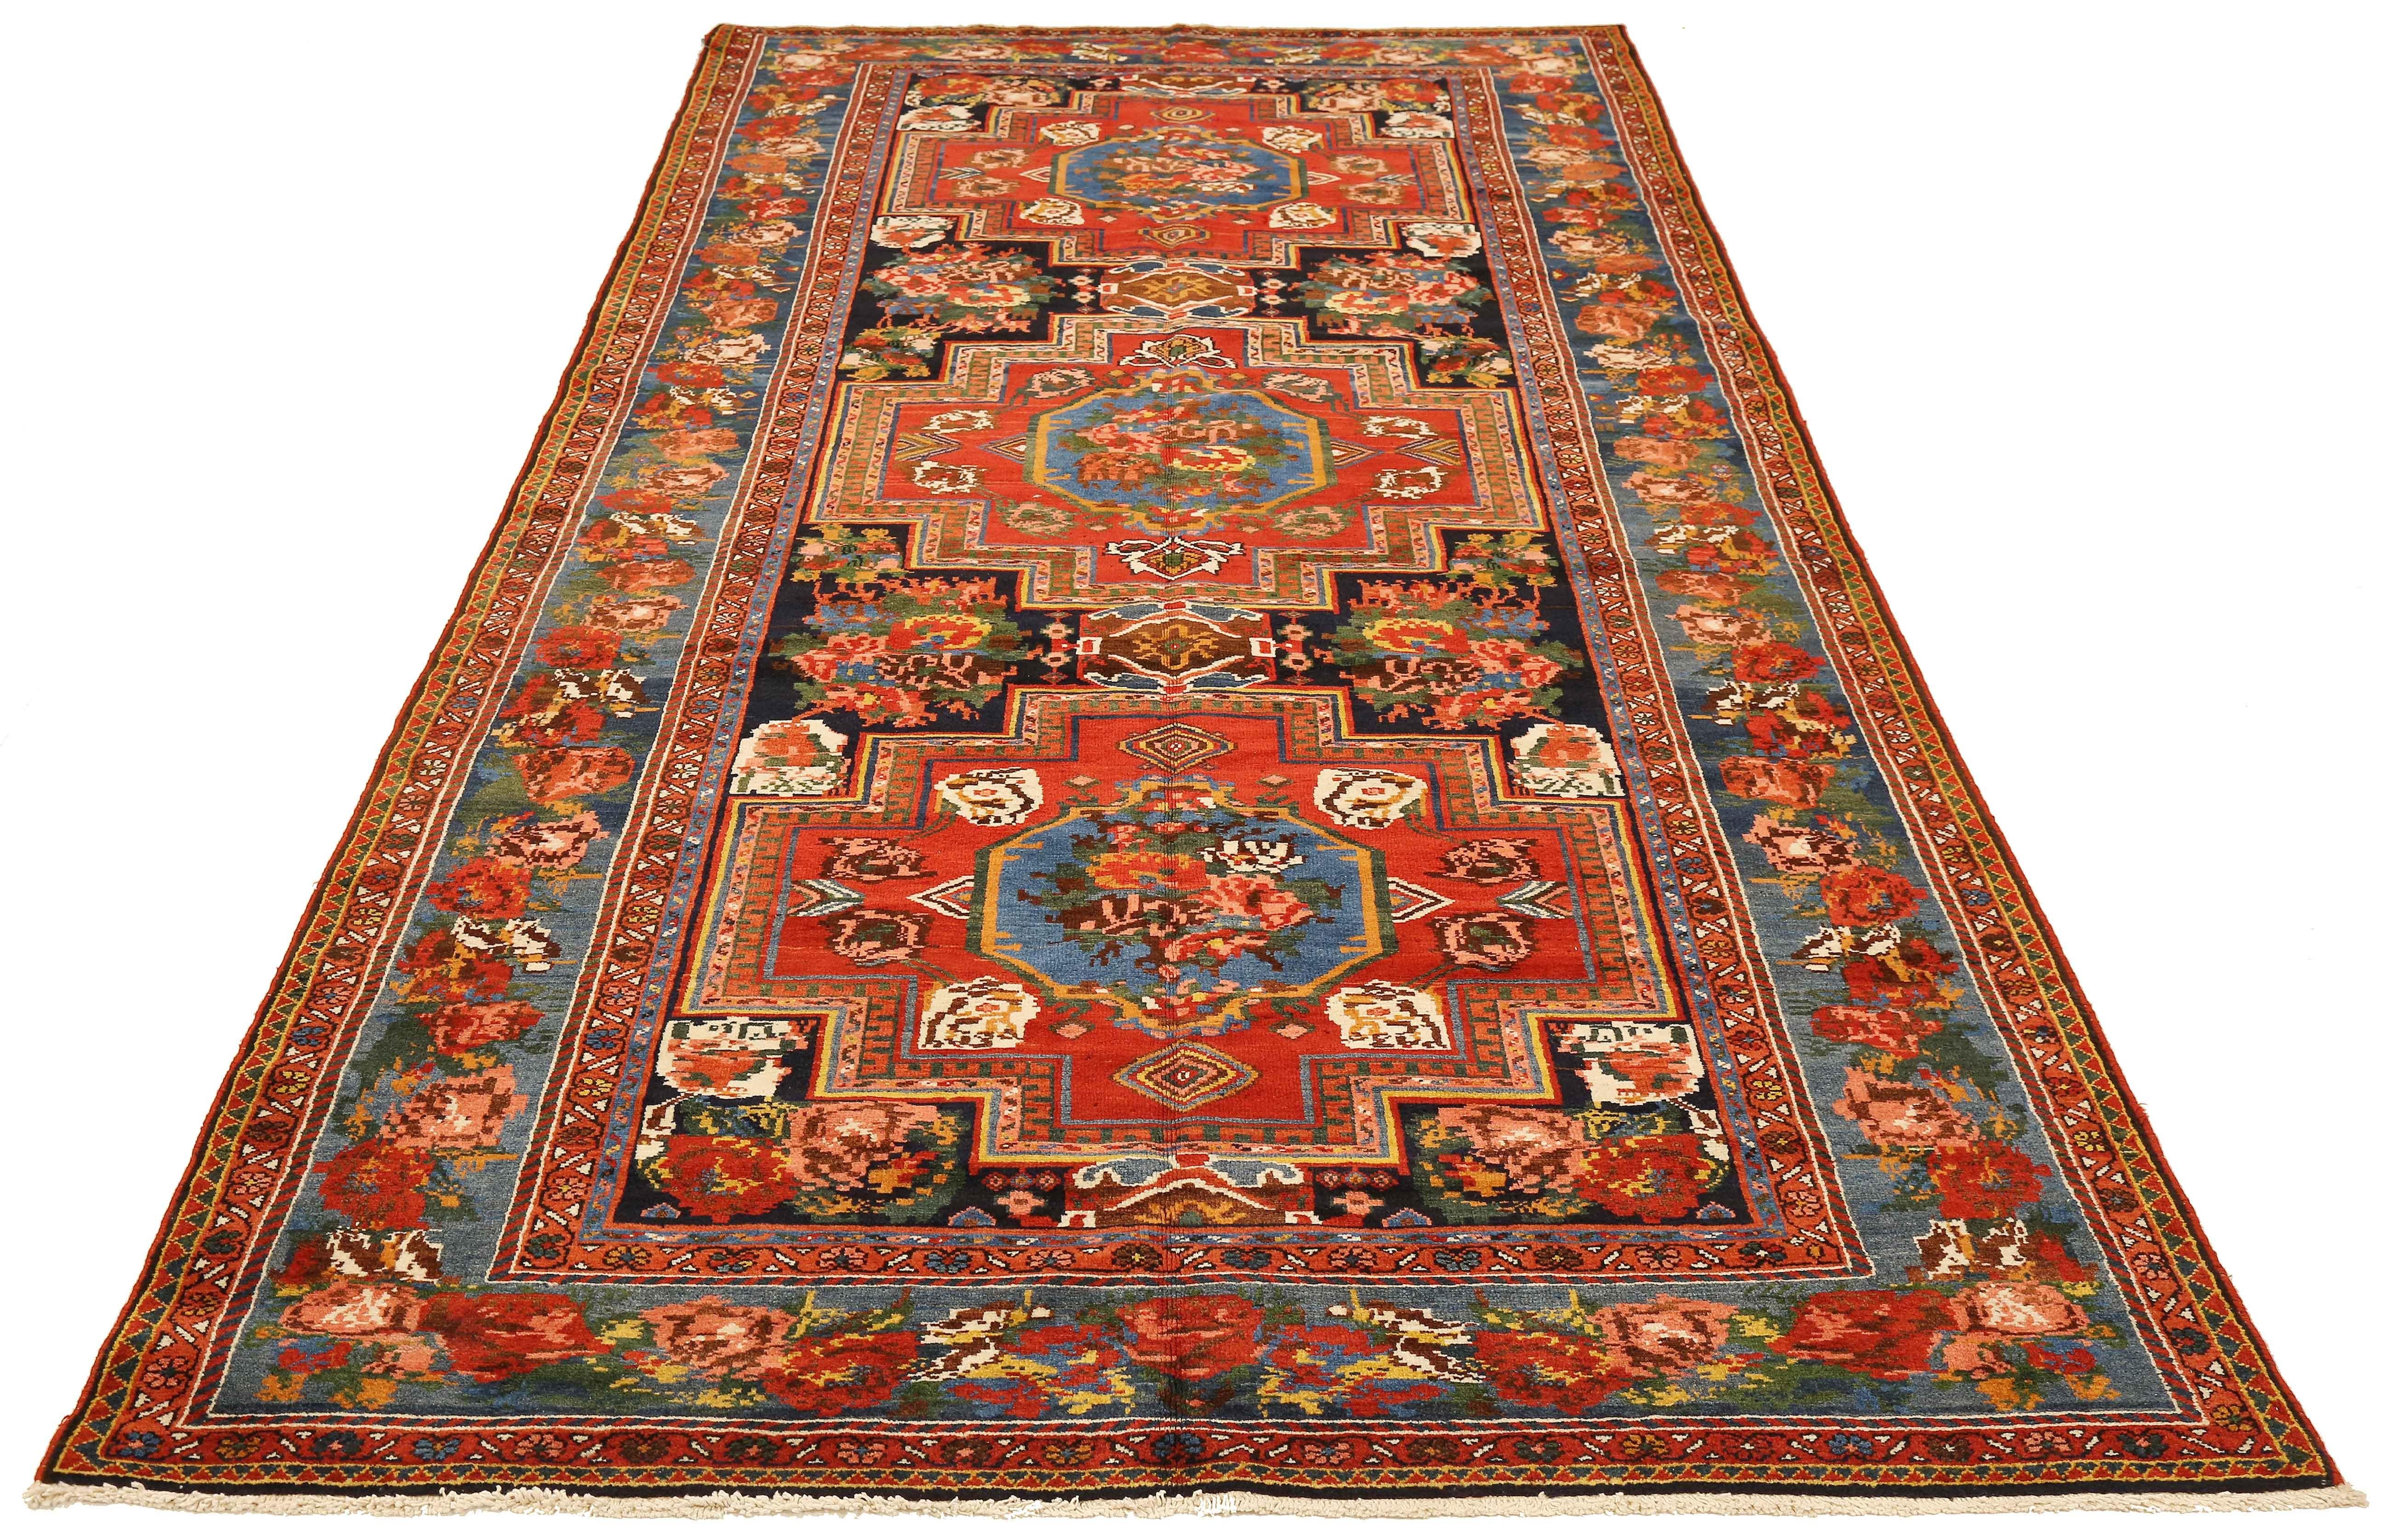 Antique Persian runner rug handwoven from the finest sheep’s wool and colored with all-natural vegetable dyes that are safe for humans and pets. It’s a traditional Bakhtiar design highlighted by blue and red floral medallions over a navy and ivory